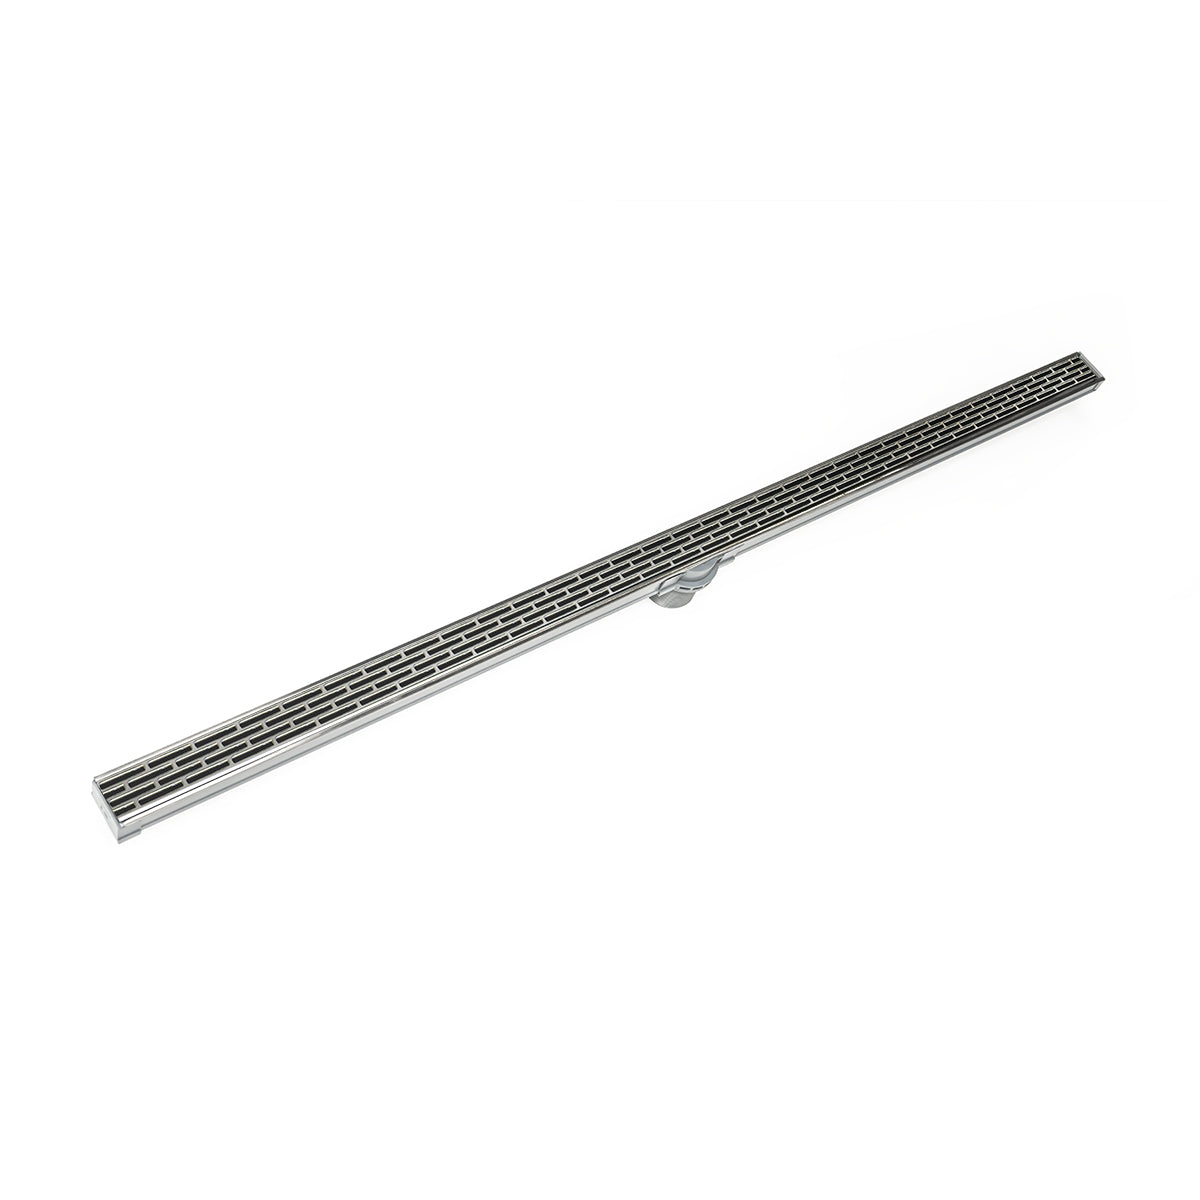 Infinity Drain 36" S-PVC Series Low Profile Site Sizable Linear Drain Kit with 1 1/2" Perforated Offset Slot Grate